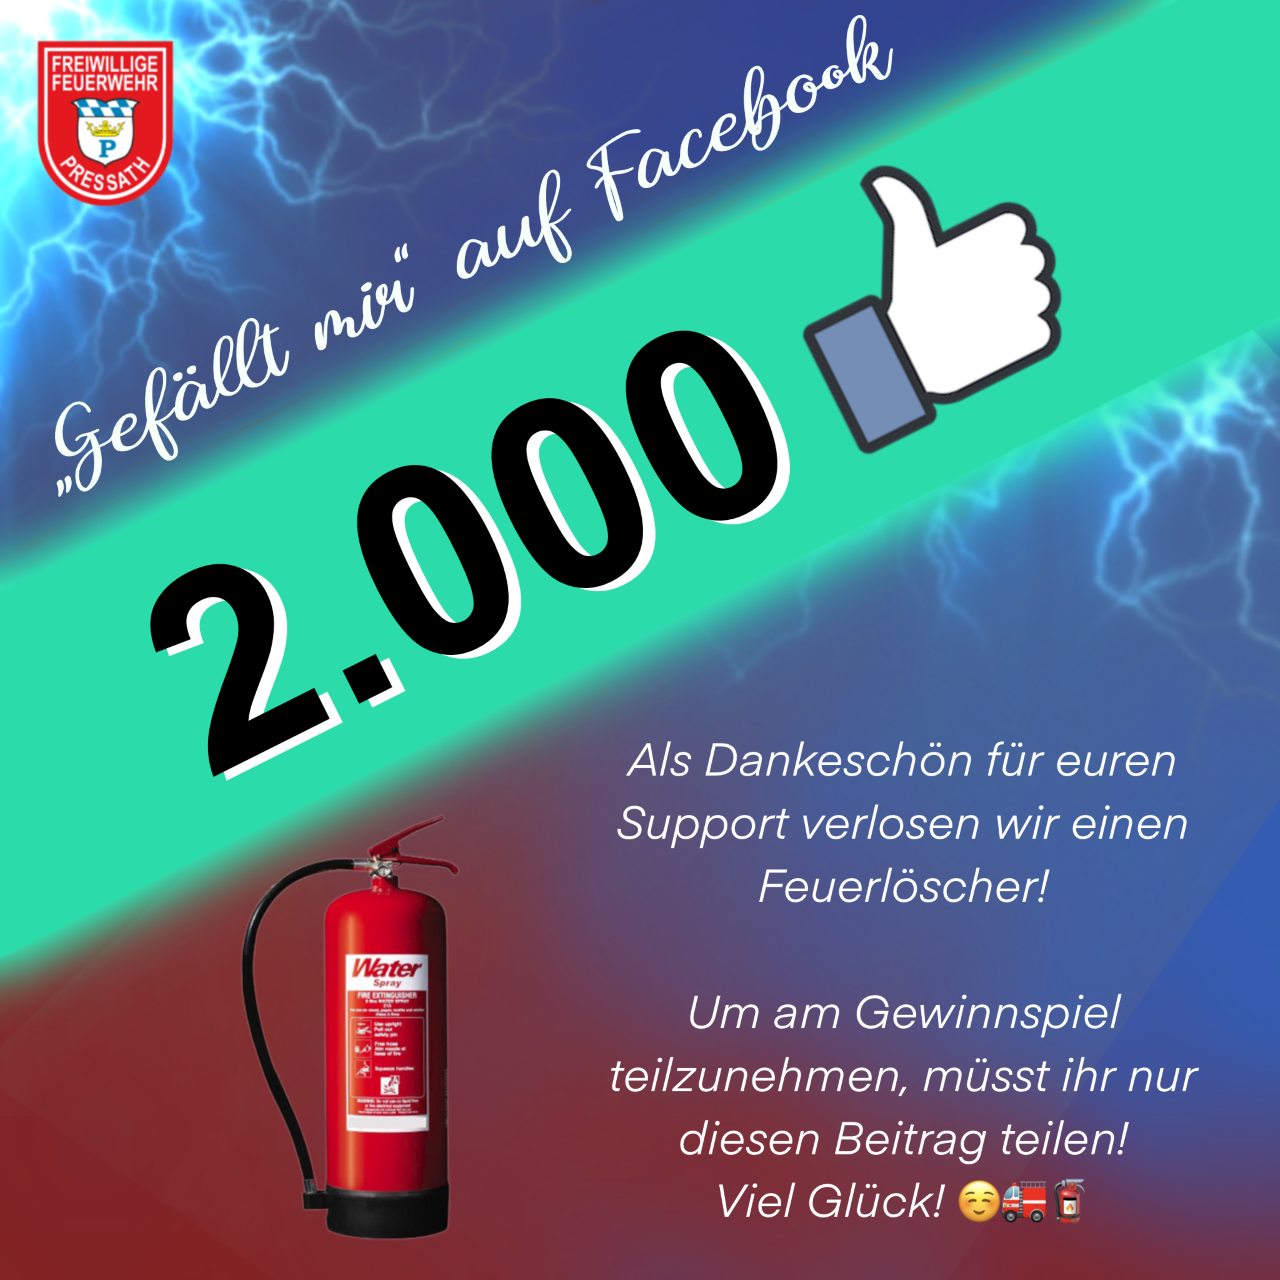 You are currently viewing 2.000 mal “Gefällt mir”!